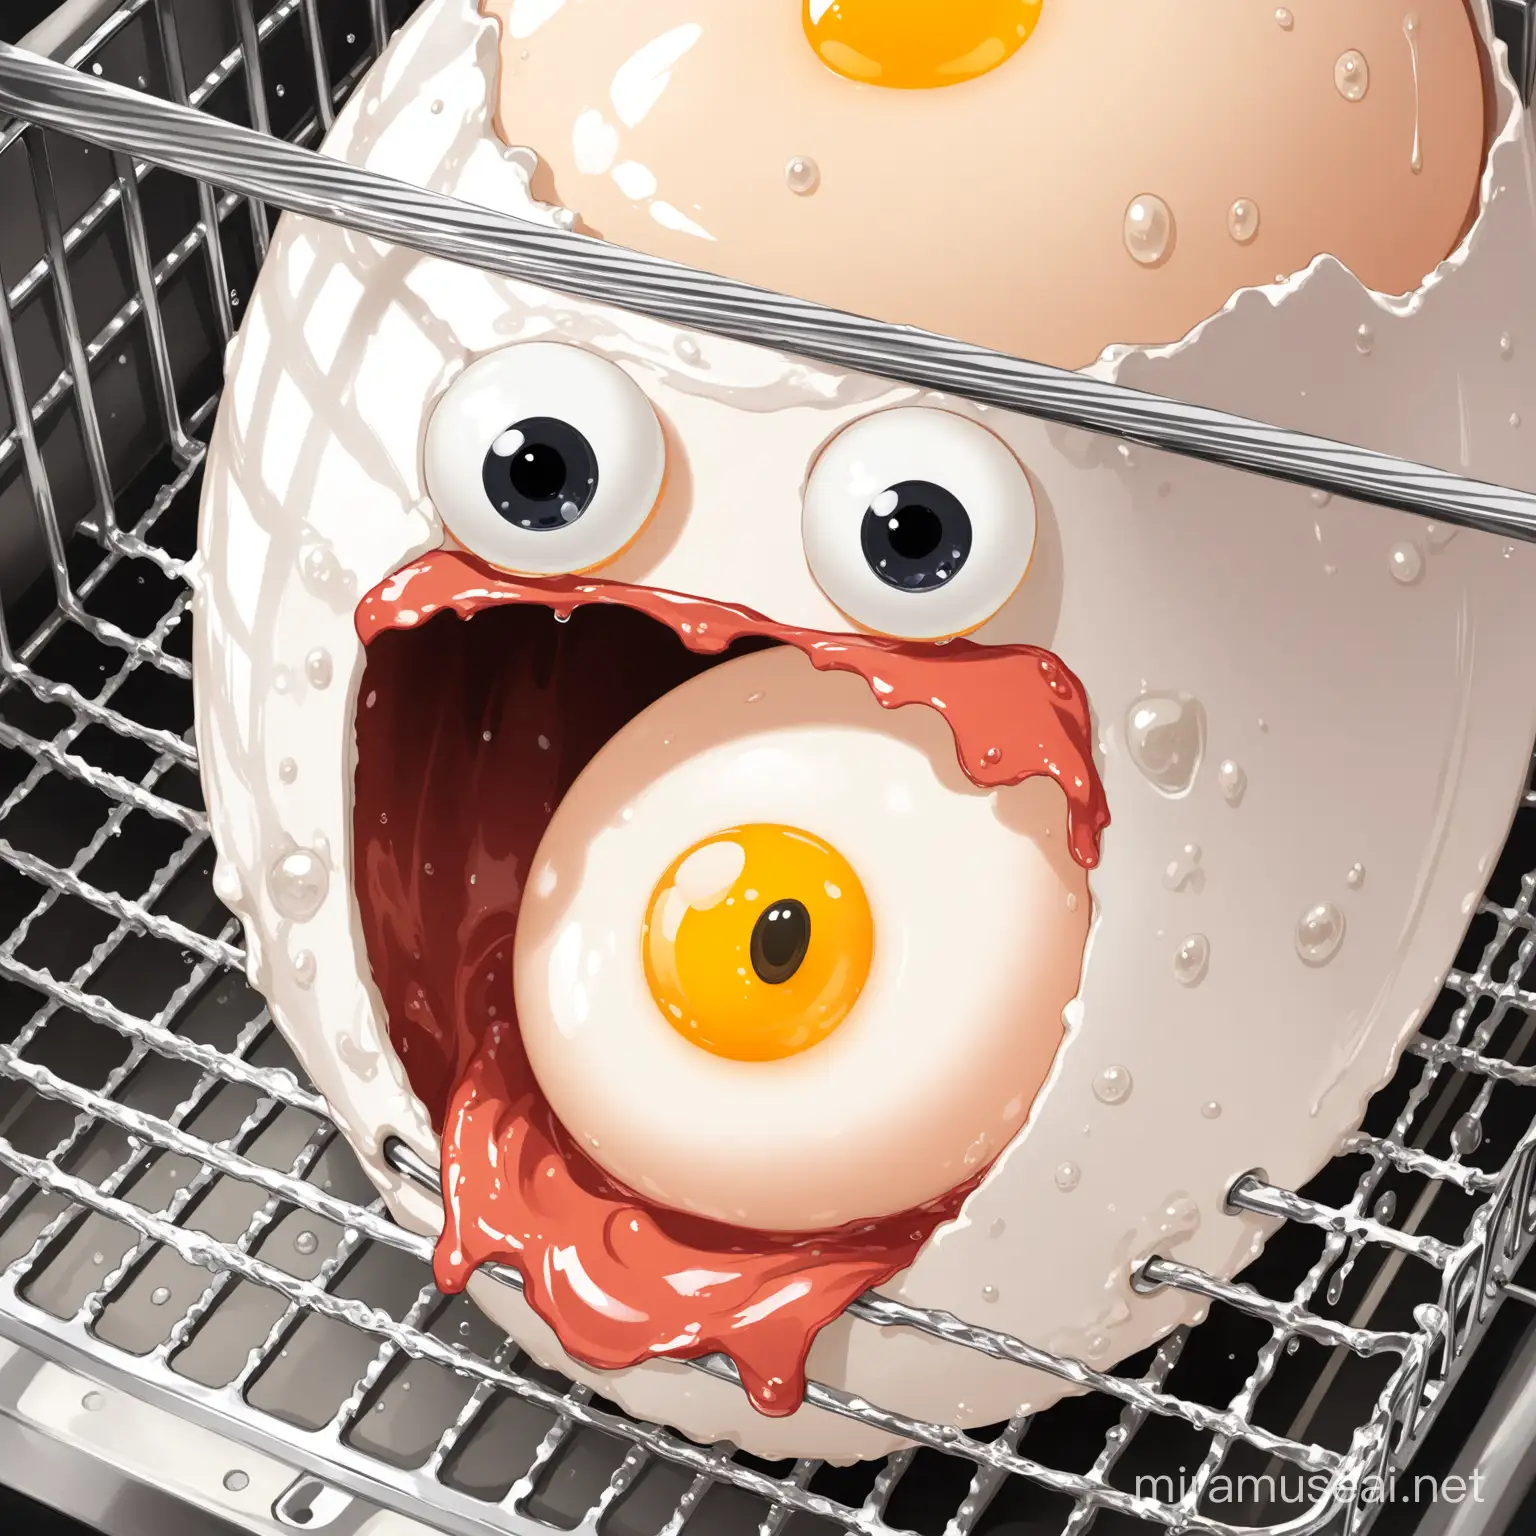 A sweaty, demented egg with googly eyes inside of a dishwasher